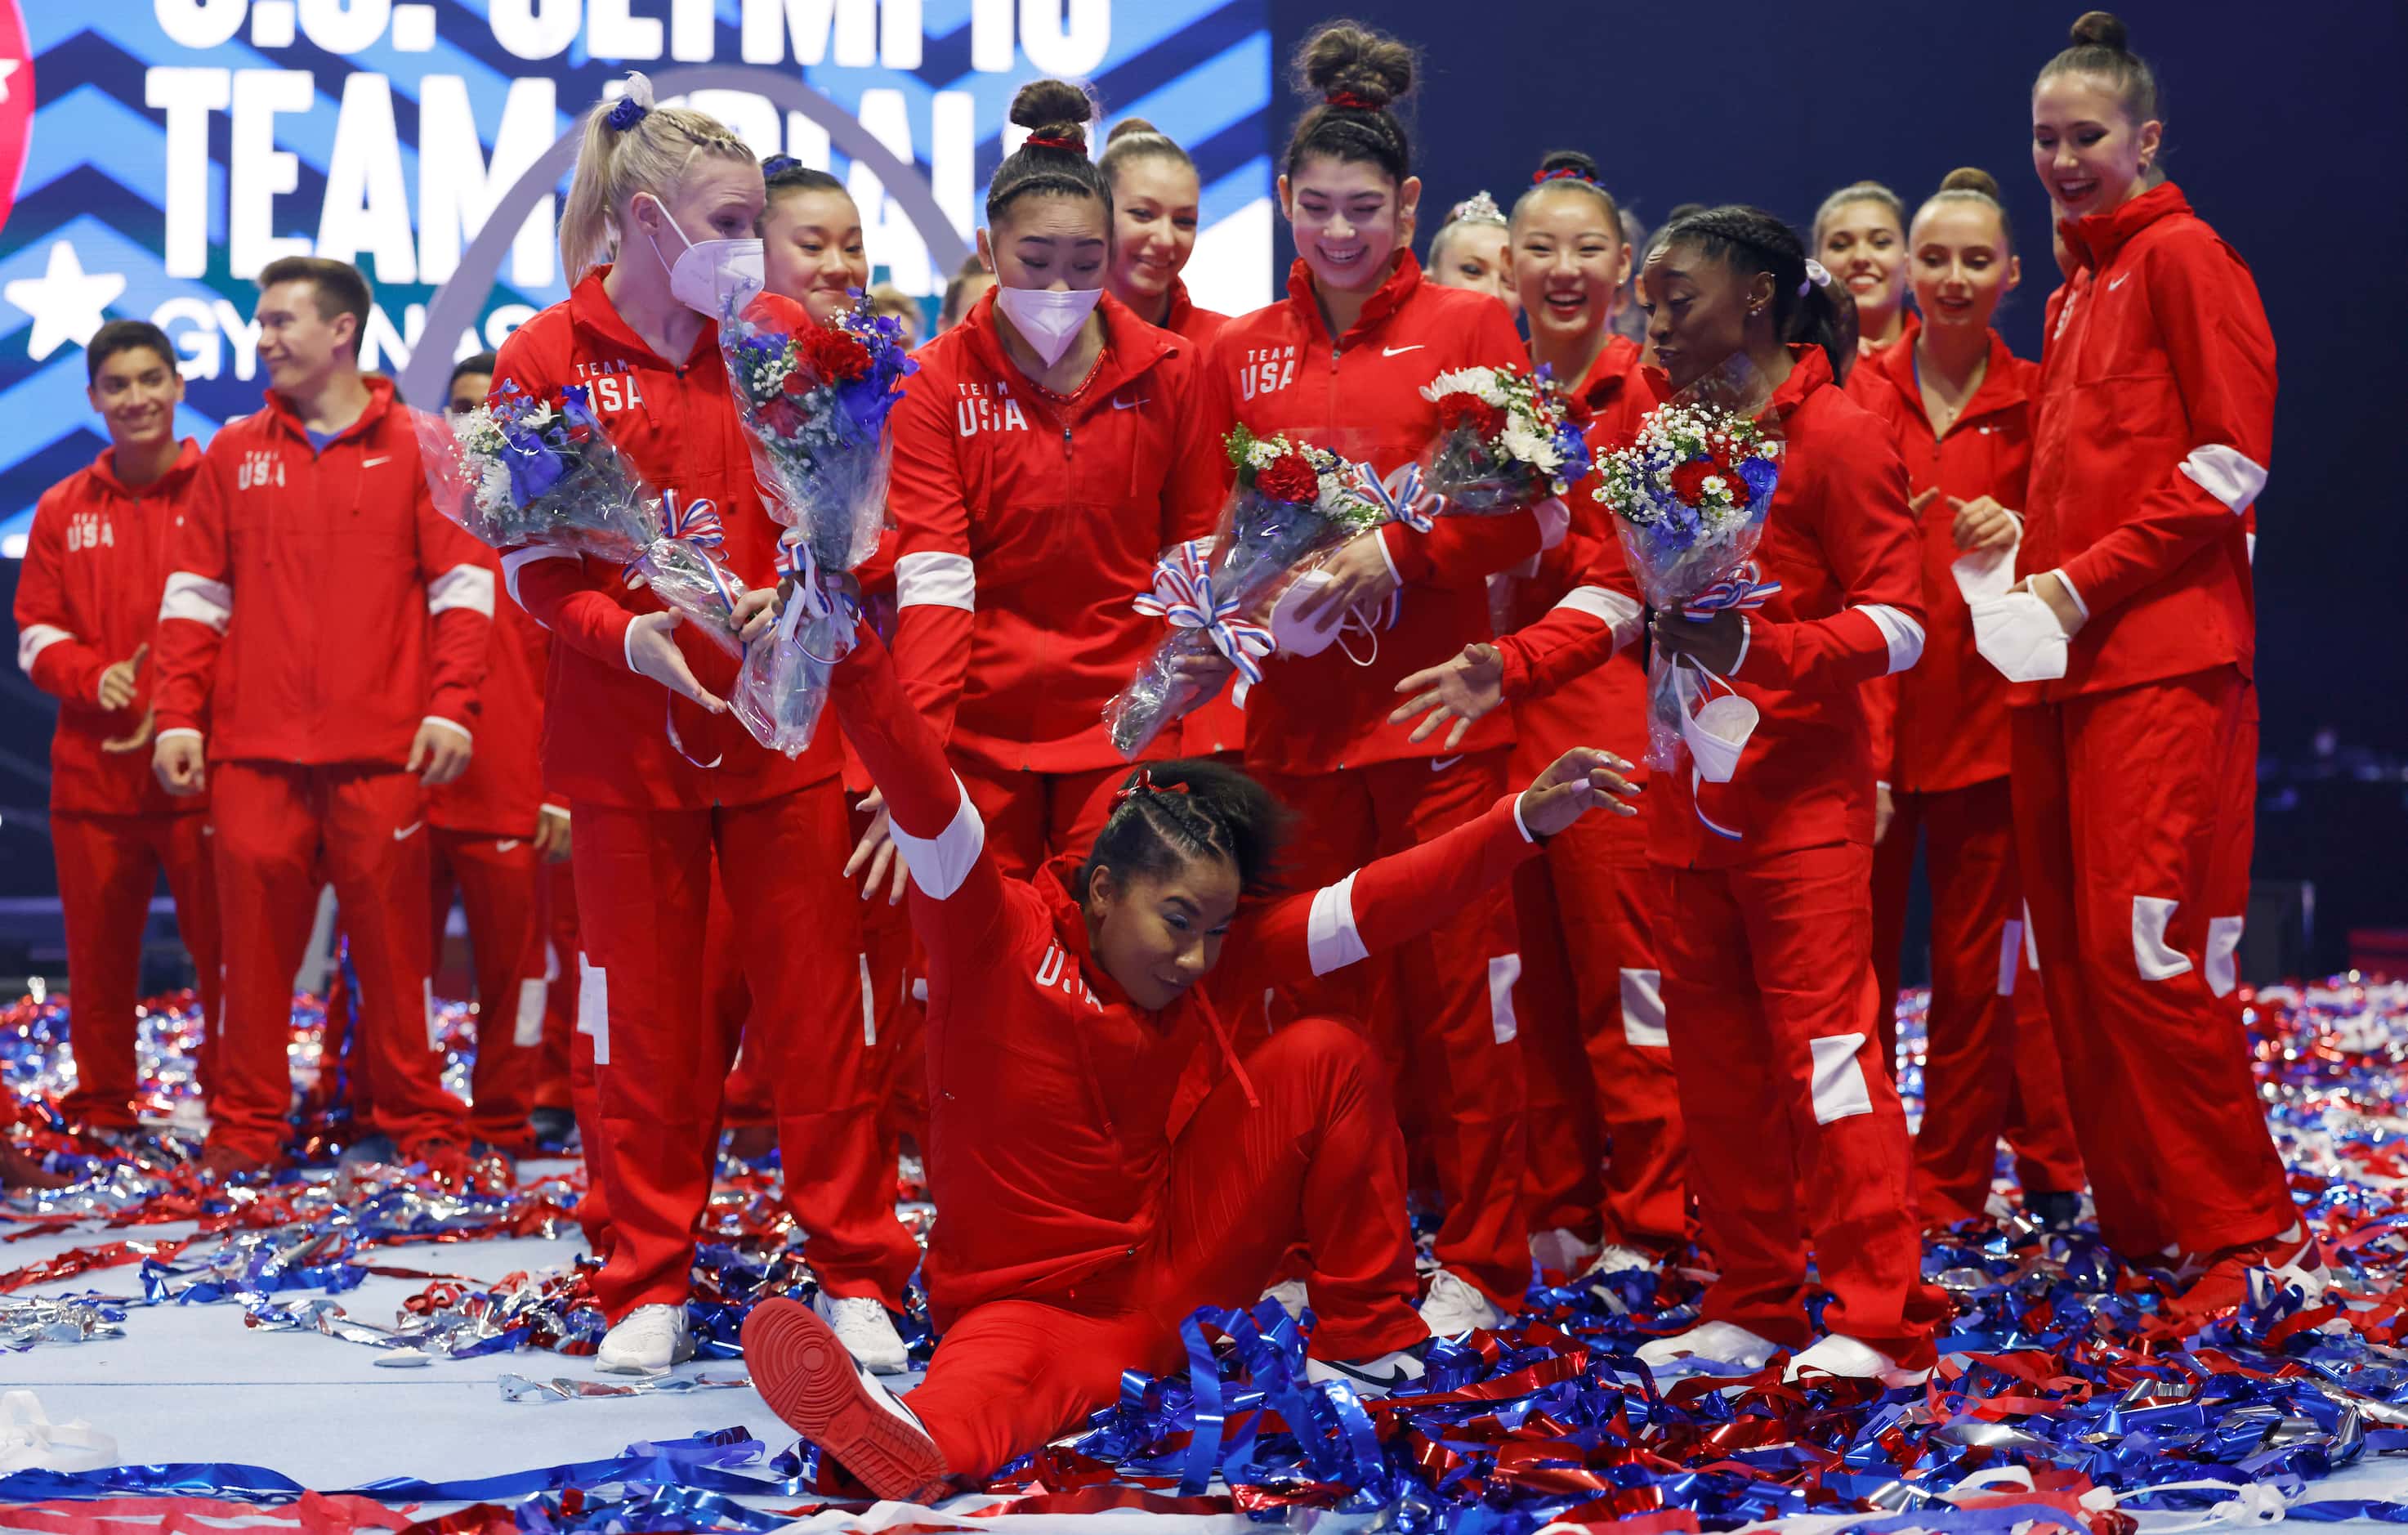 Jordan Chiles falls rushing to get into a group photo after the women's U.S. Olympic...